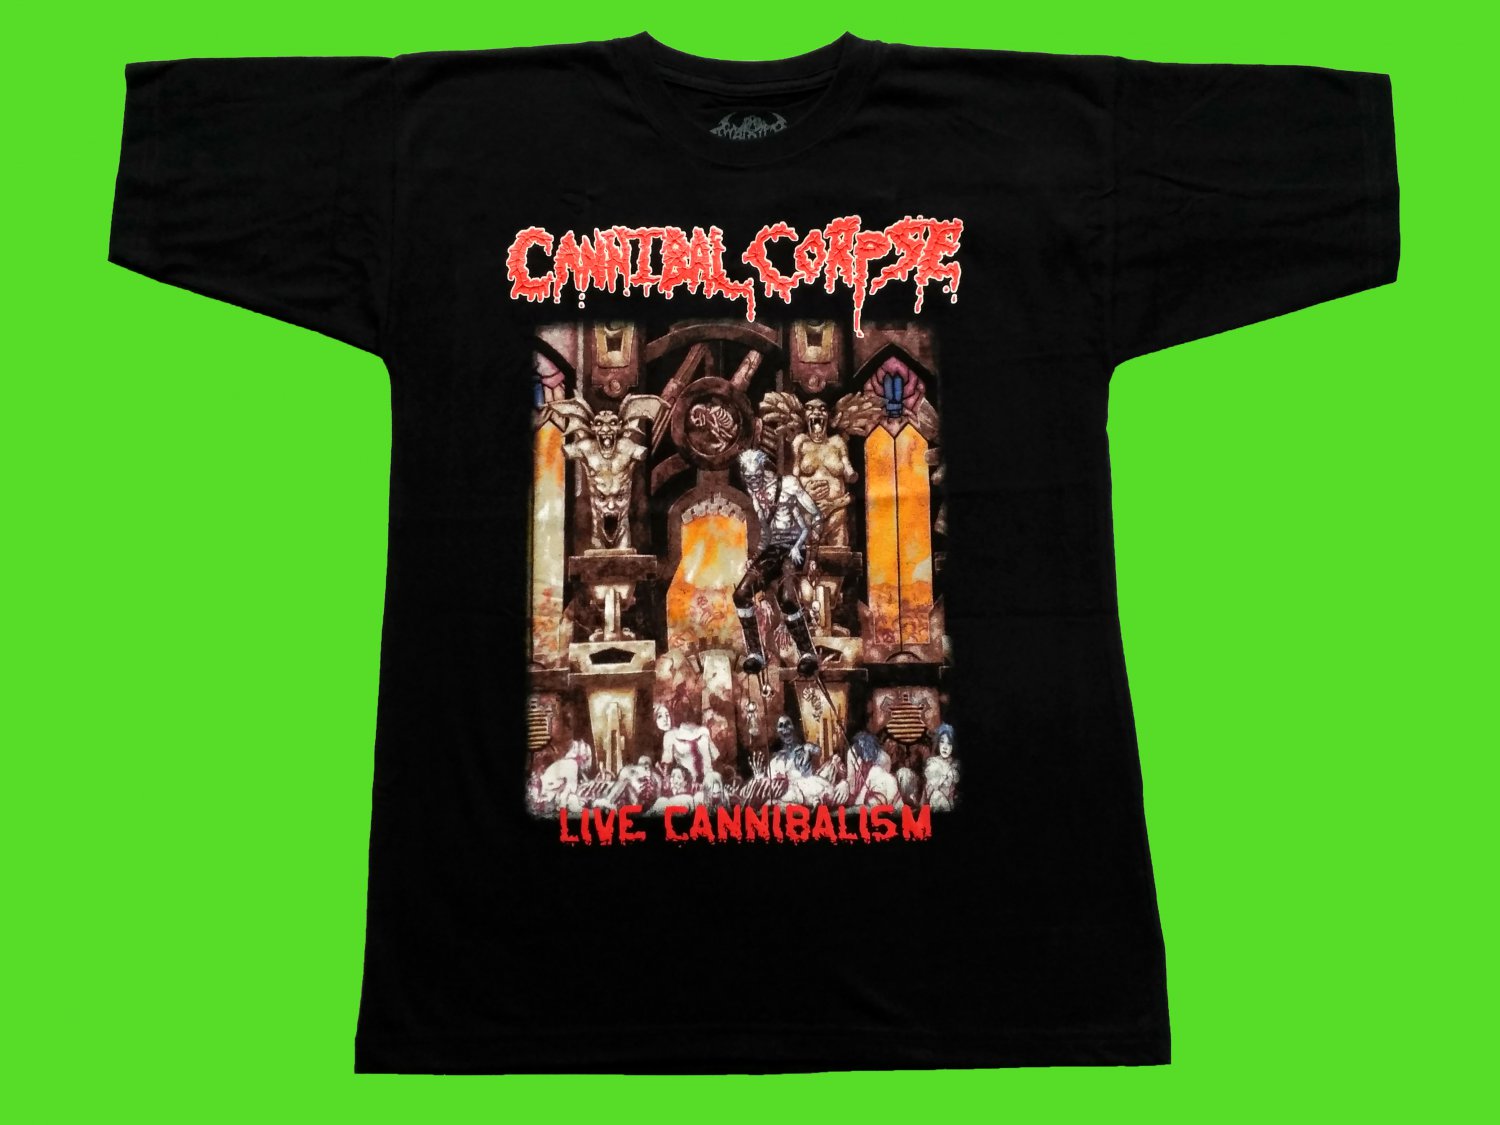 CANNIBAL CORPSE - Live Cannibalism T-shirt (S) NEW heavy thrash death metal